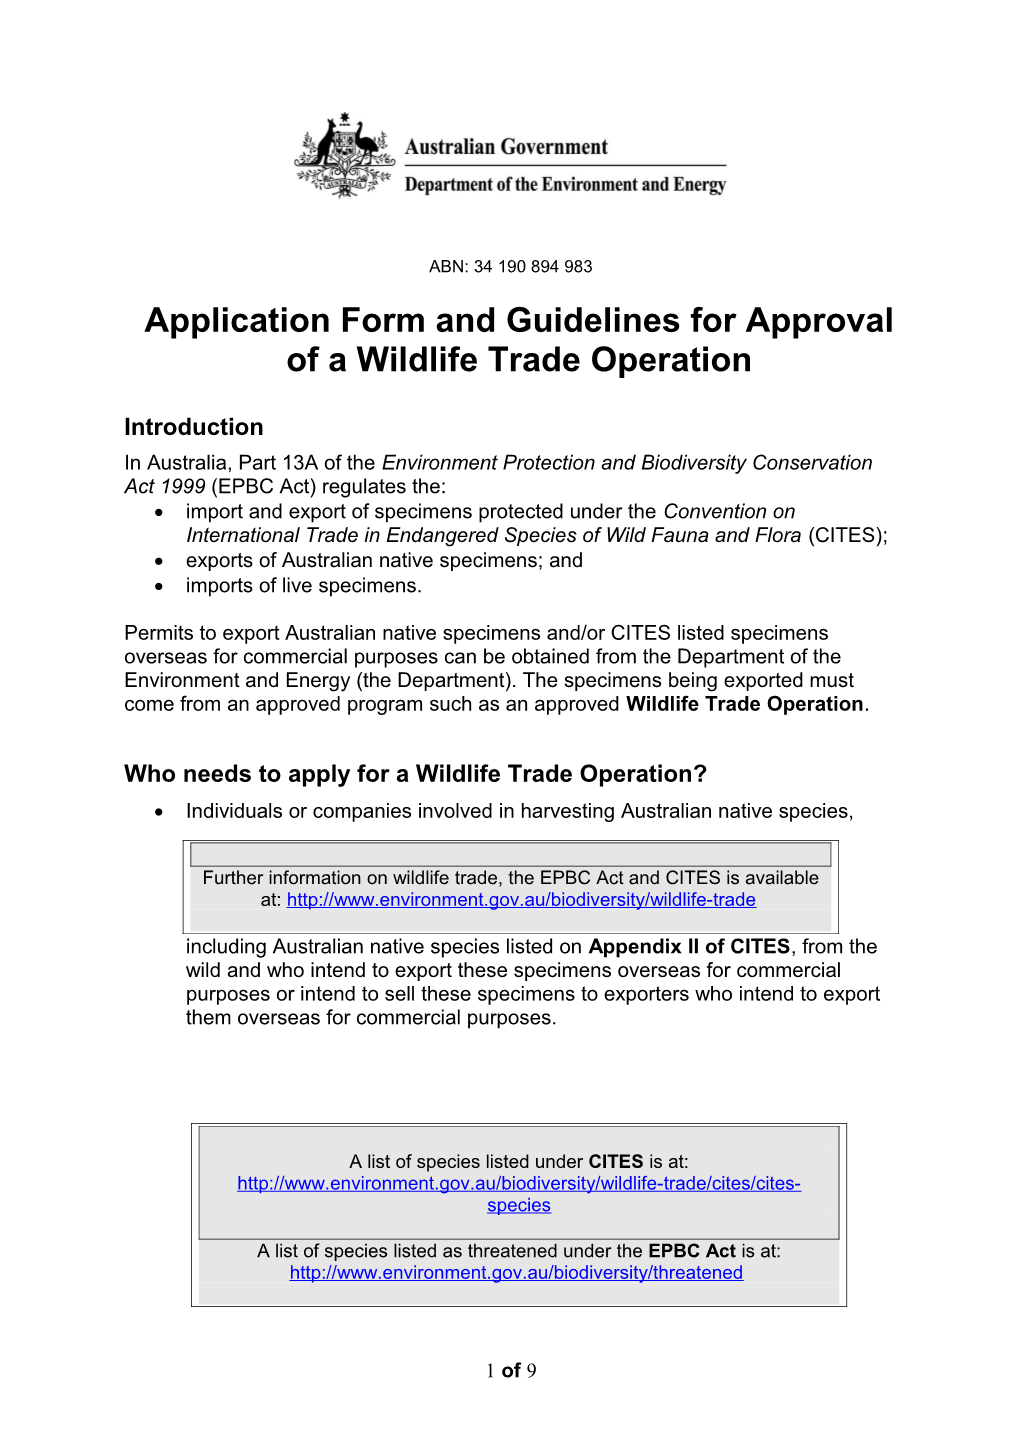 Application Form and Guidelines for Approval of a Wildlife Trade Operation